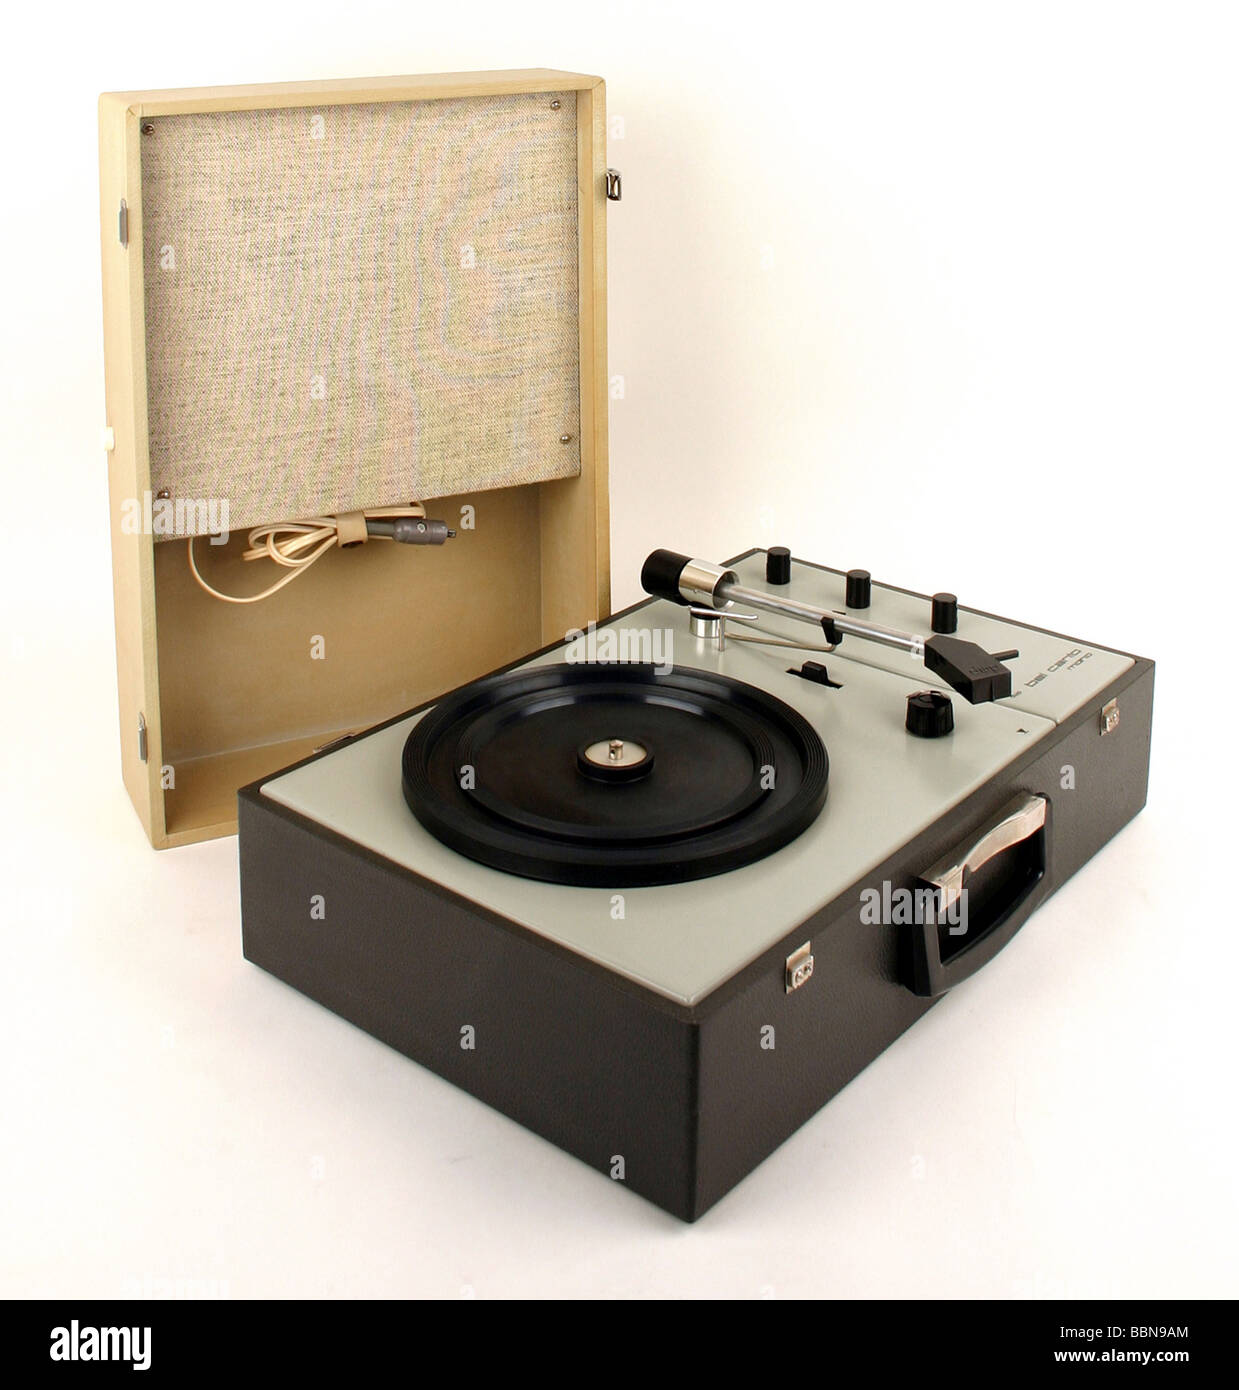 technics, record player, portable record player bel canto mono, made by Delphinwerk Pirna, GDR, 1968, Stock Photo